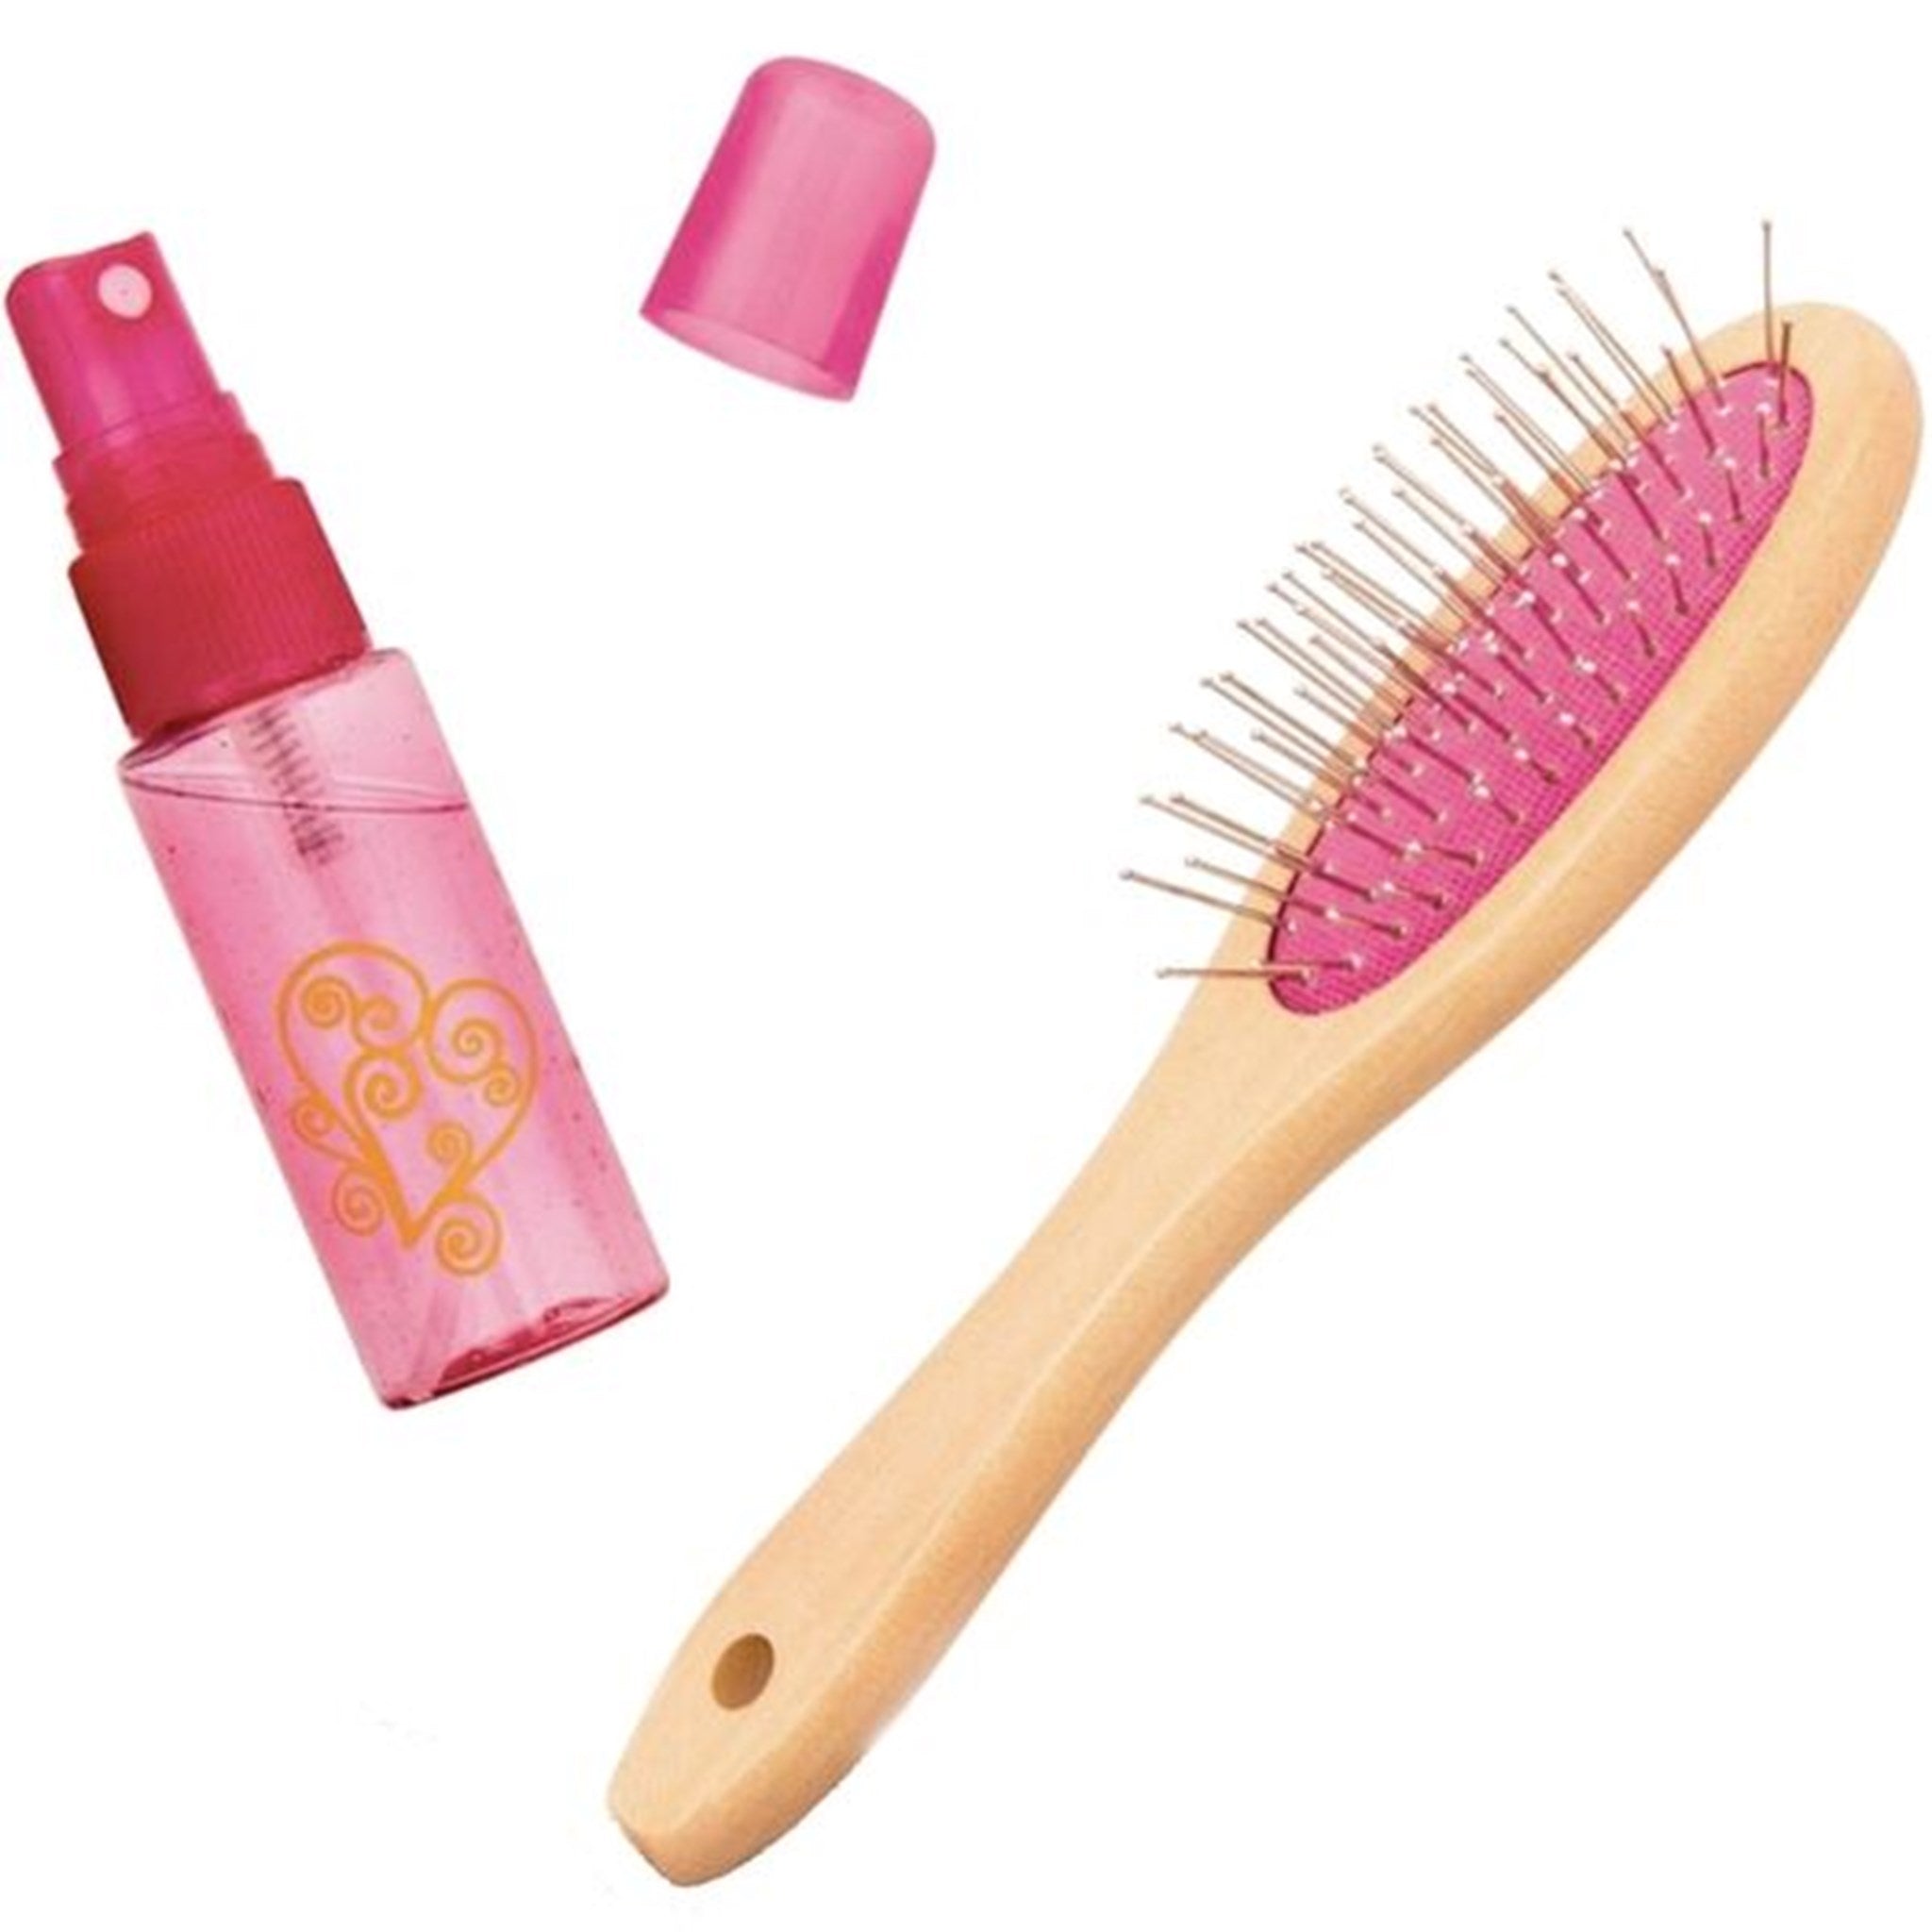 Our Generation Doll Accessories - Hairbrush and Spray Bottle